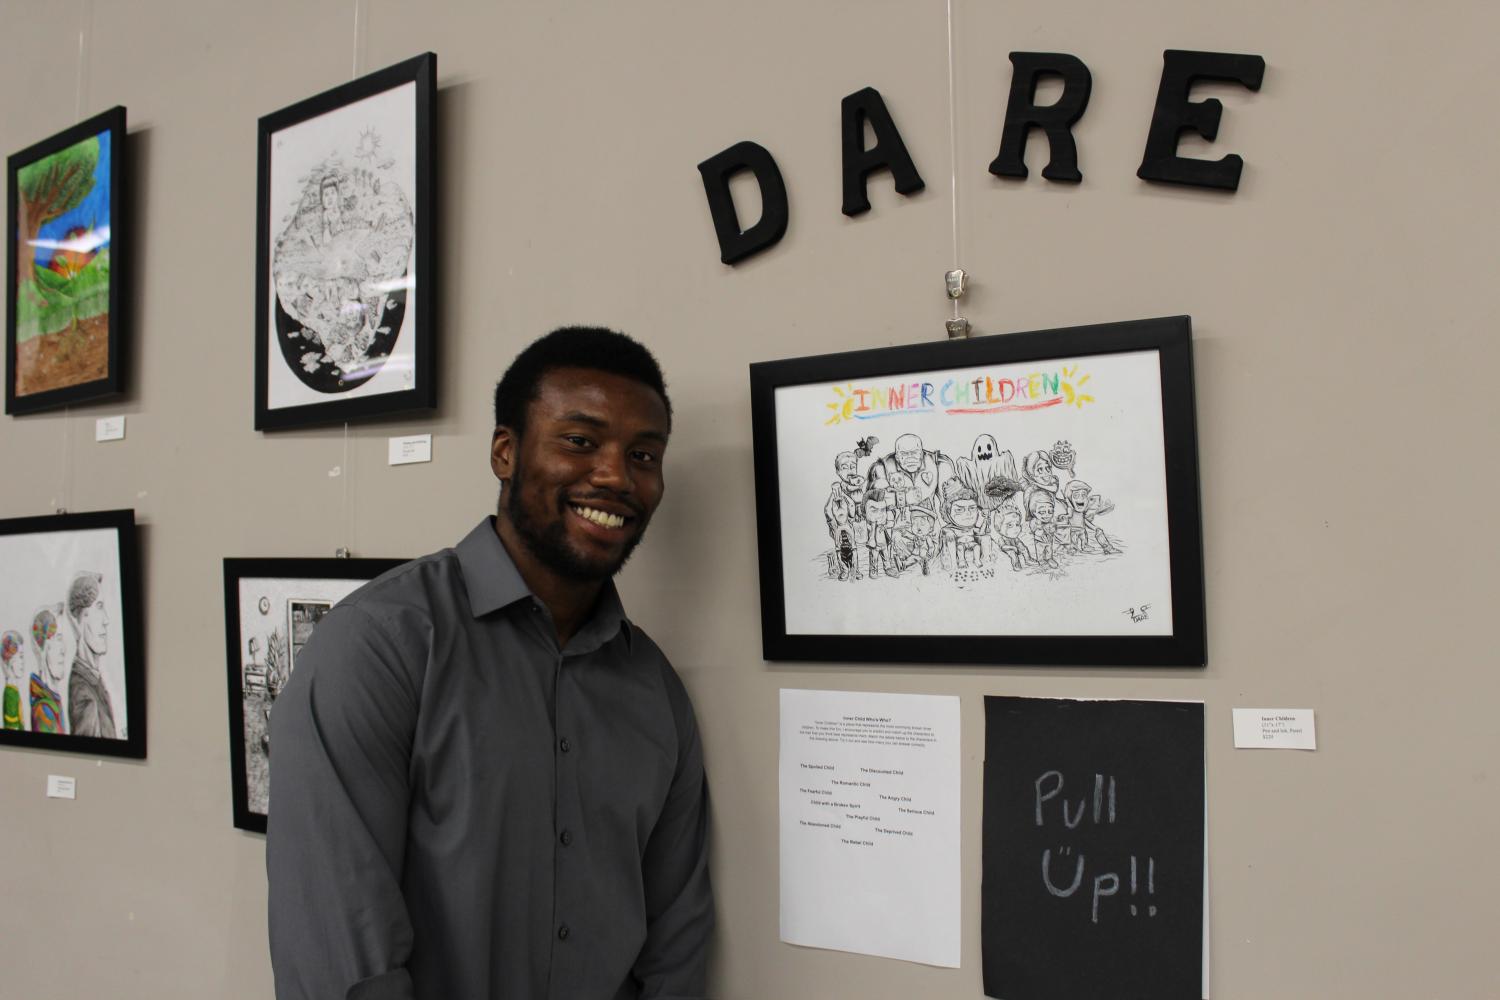 Artist Dare Talley standing next to his artwork during his “Inner Child” exhibition at Charity Wings on Sept. 1.